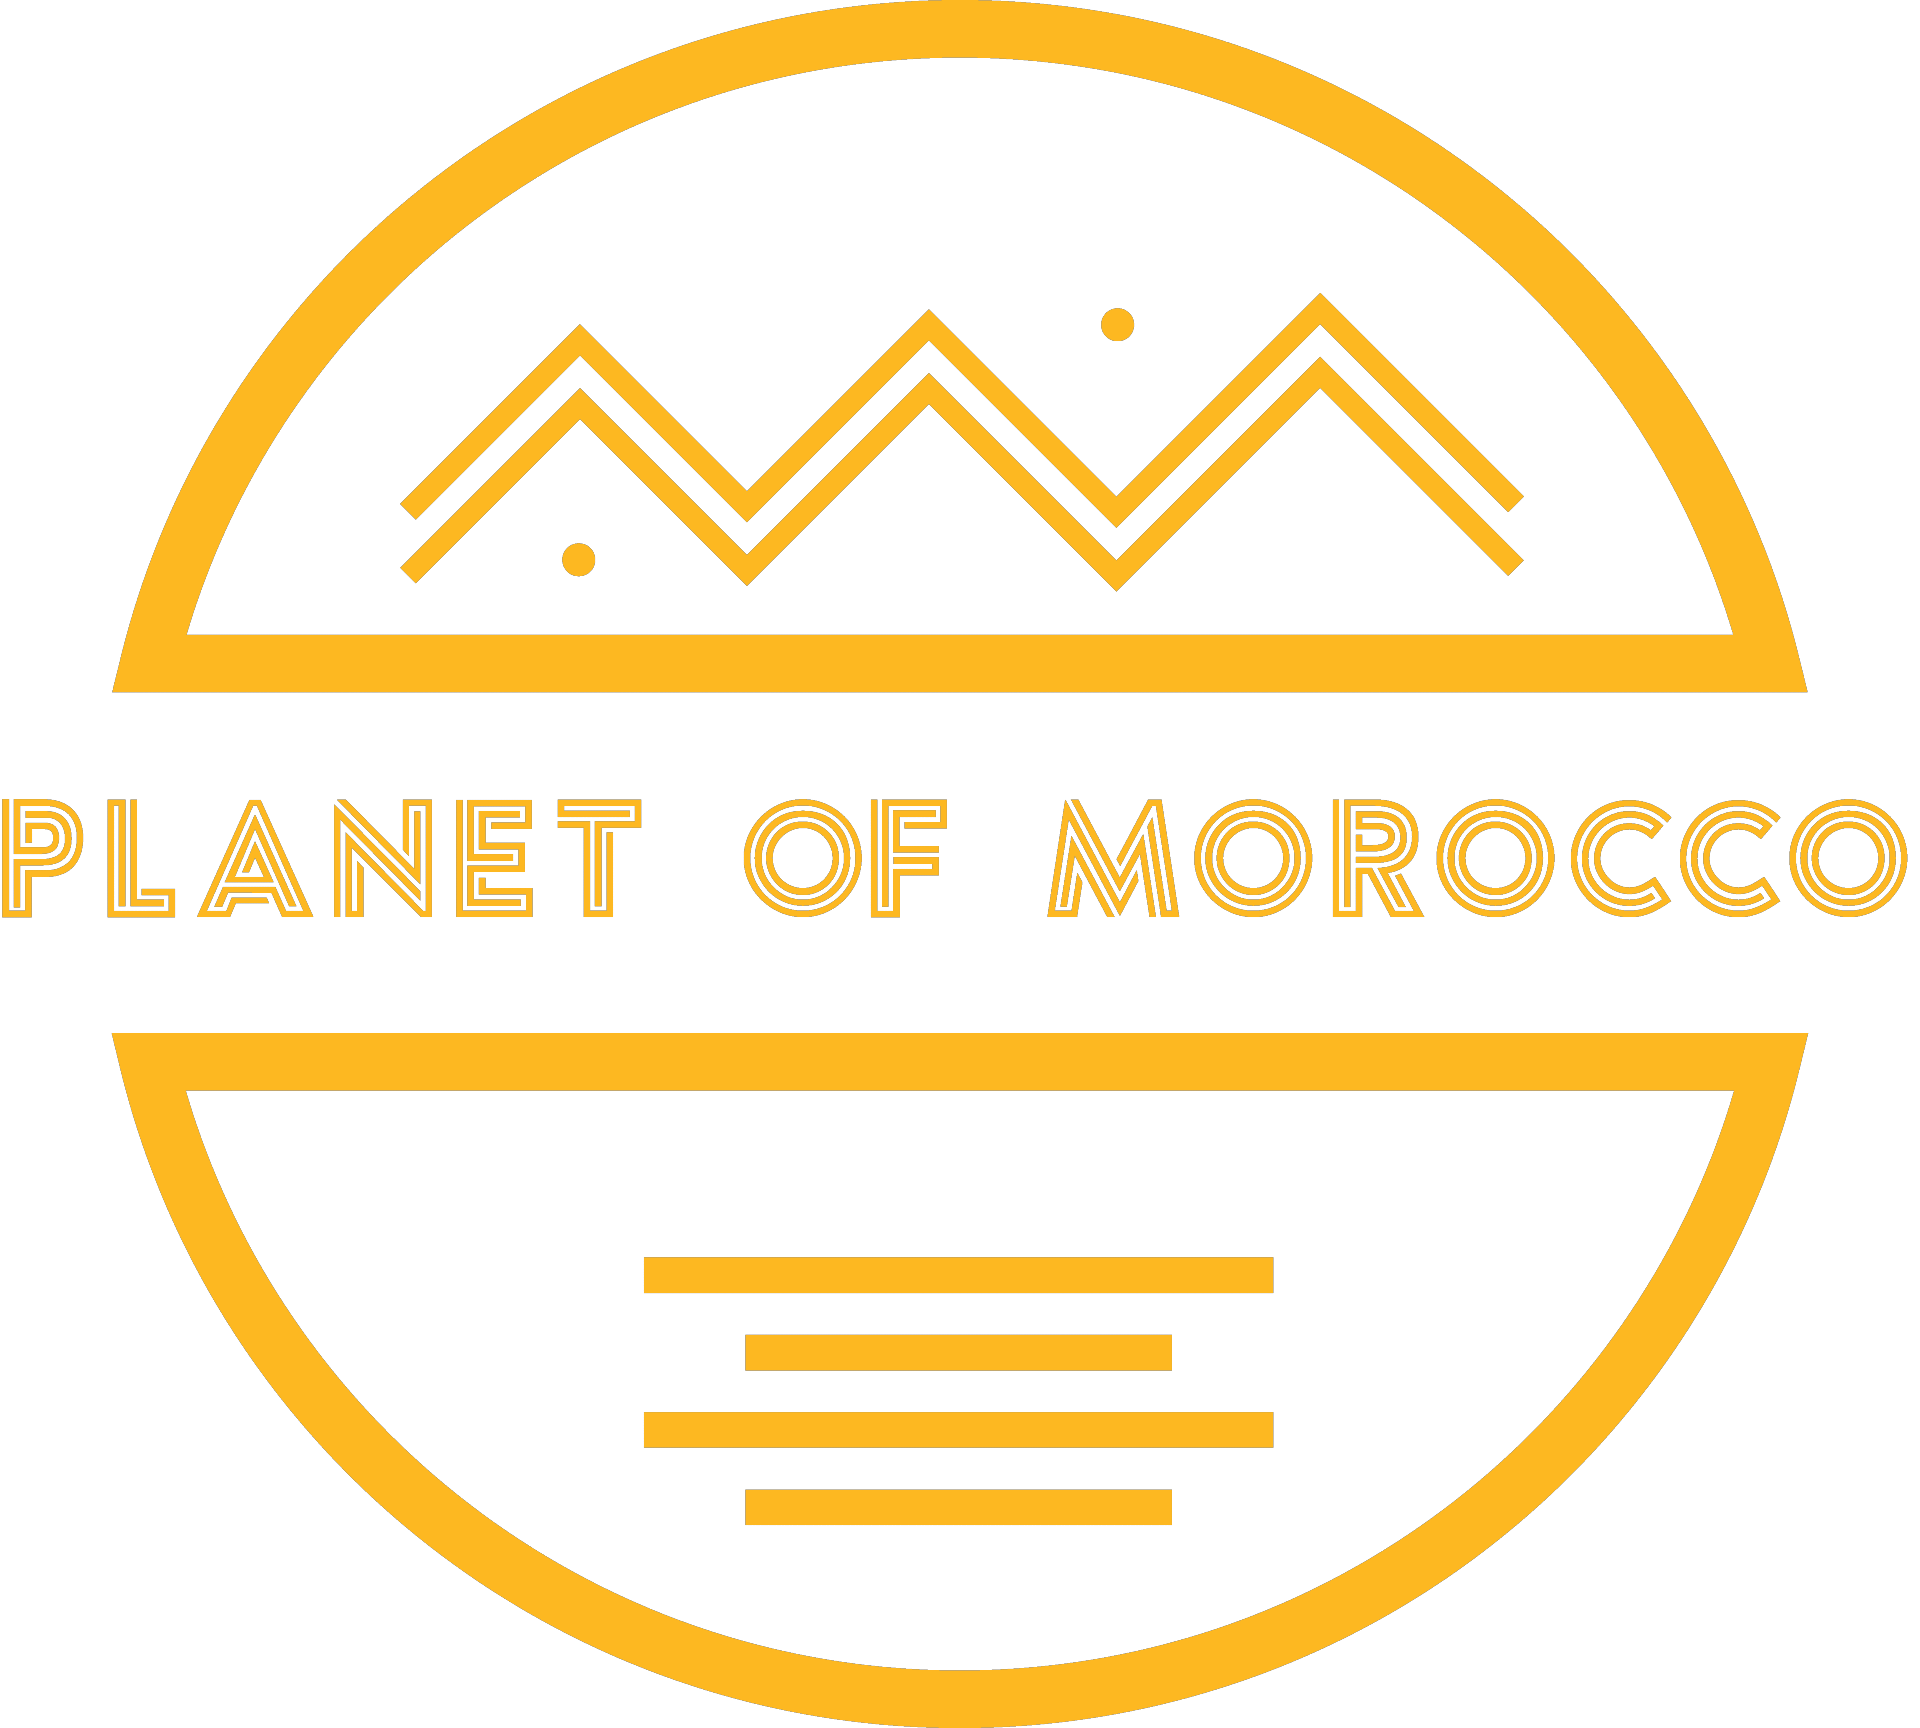 PLANET OF MOROCCO